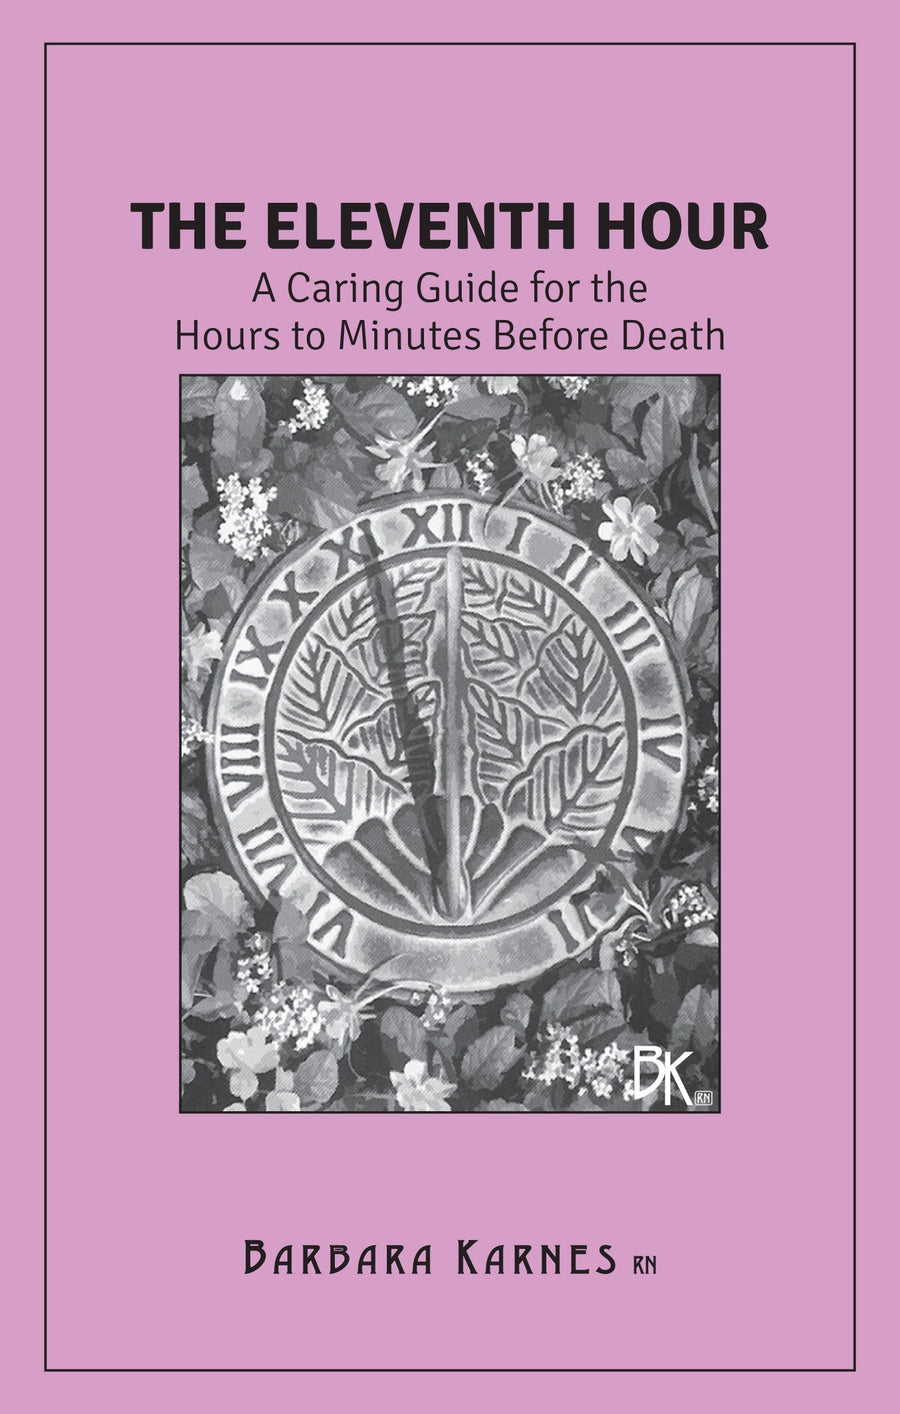 “The Eleventh Hour” is the companion booklet to "Gone From My Sight: The Dying Experience" together they have been shown to significantly improve CAHPS scores, family survey results and meet Medicare requirements for consistent family education. Agencies/hospices put these two booklets together in their initial family packets to inform families on the signs of approaching death and how to care for a loved one who is dying. 